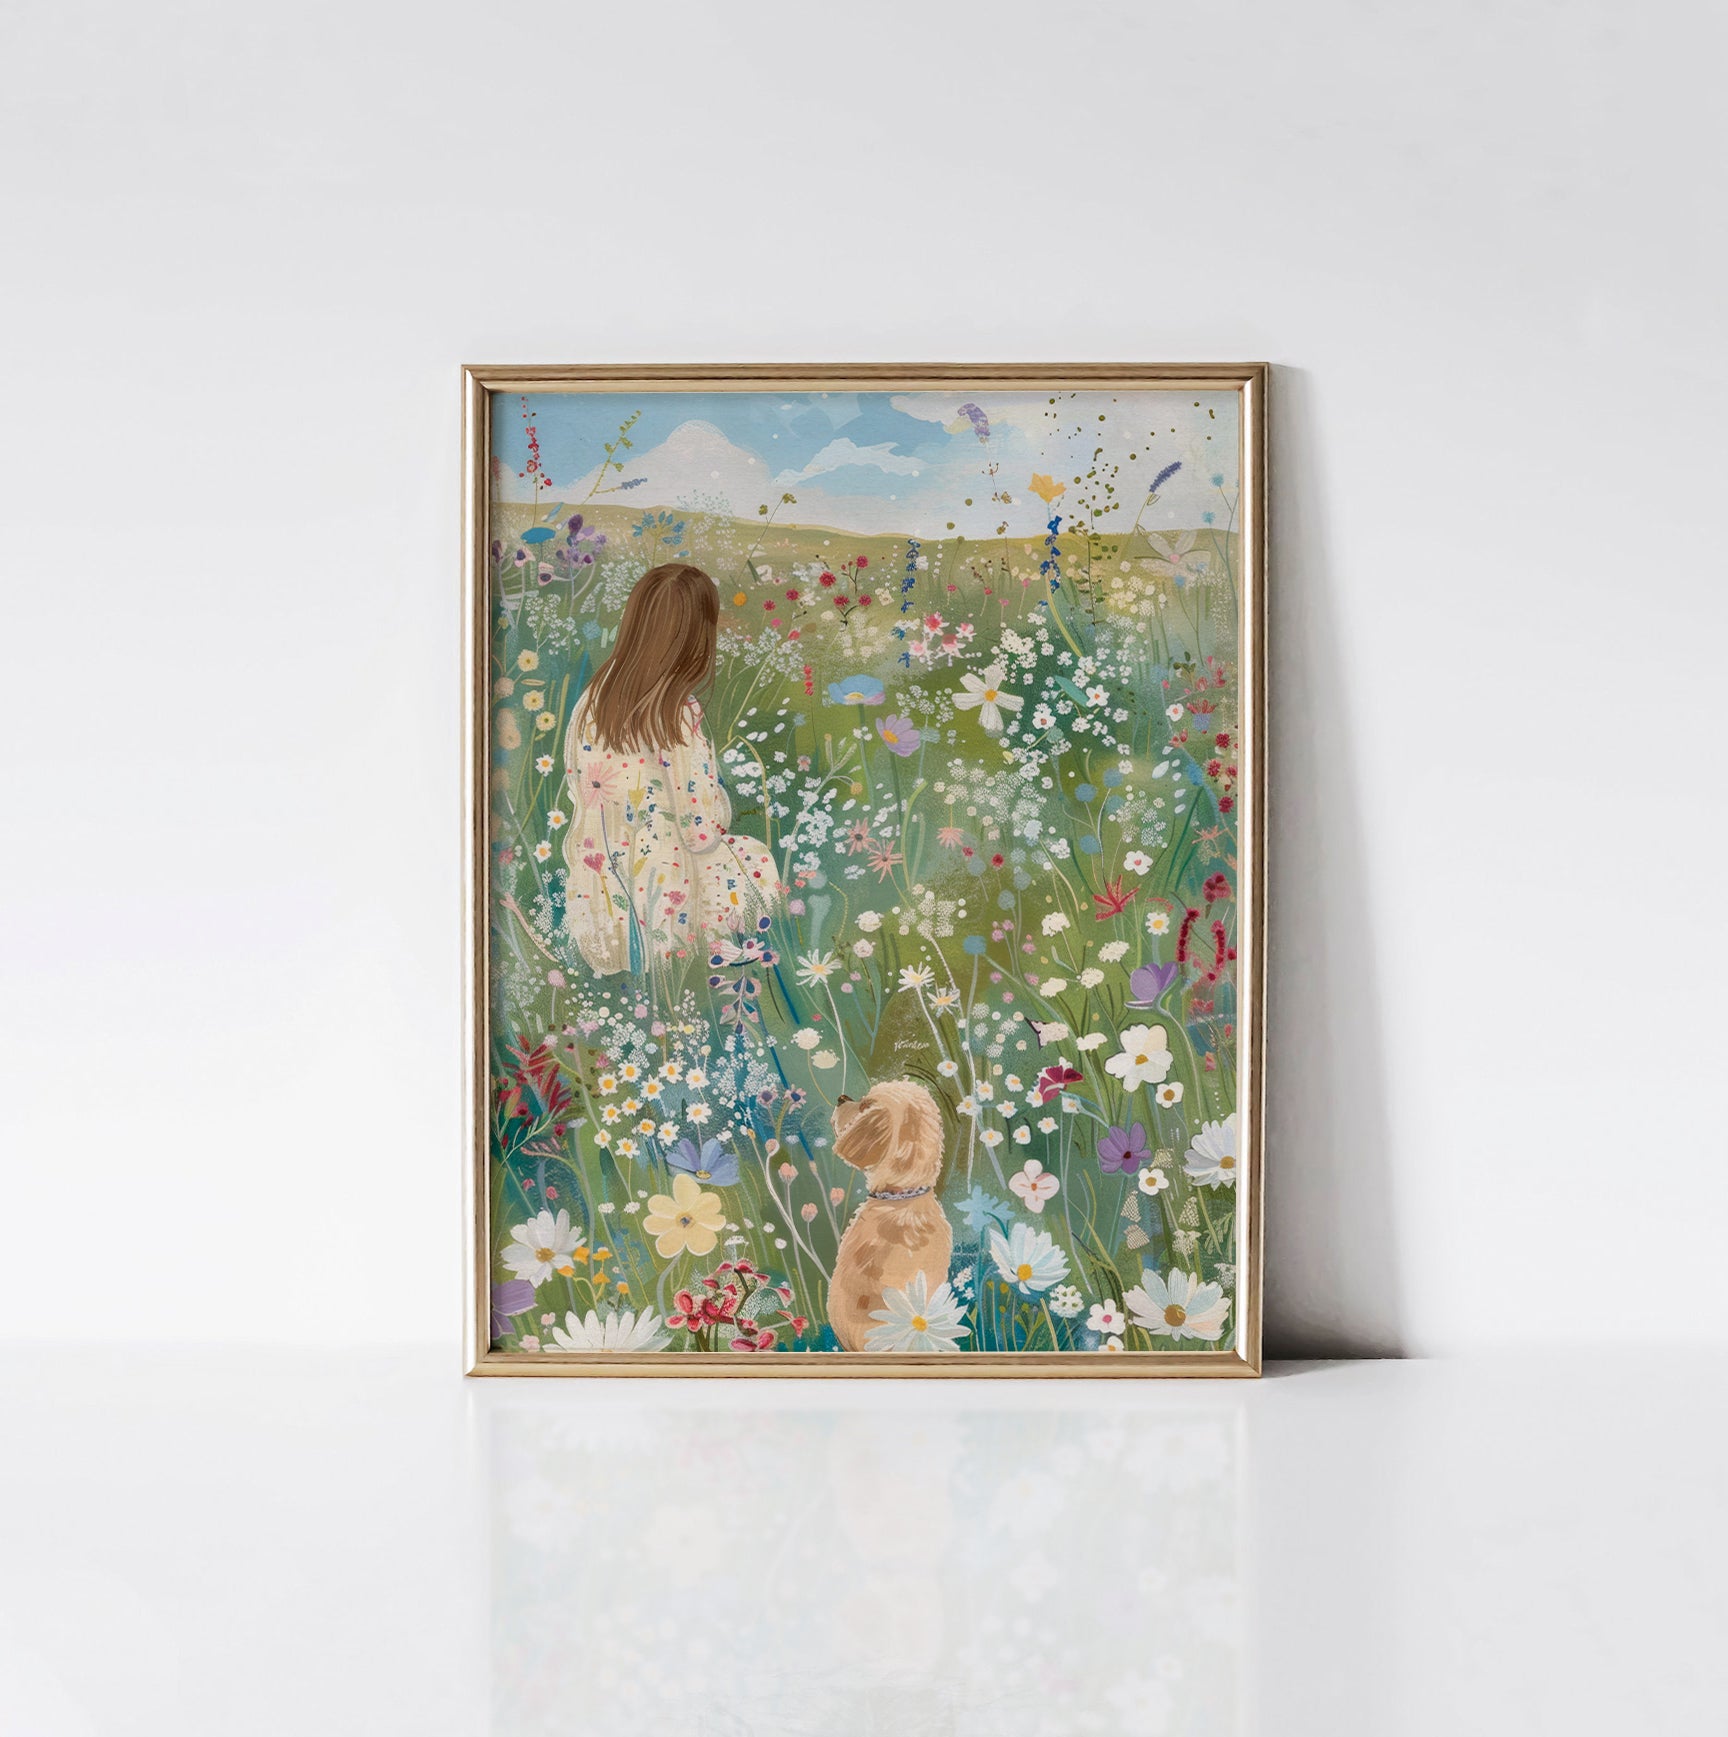 The "Field of Dreams" art print displayed in an elegant gold frame, featuring a girl and her dog amidst a colorful wildflower meadow.